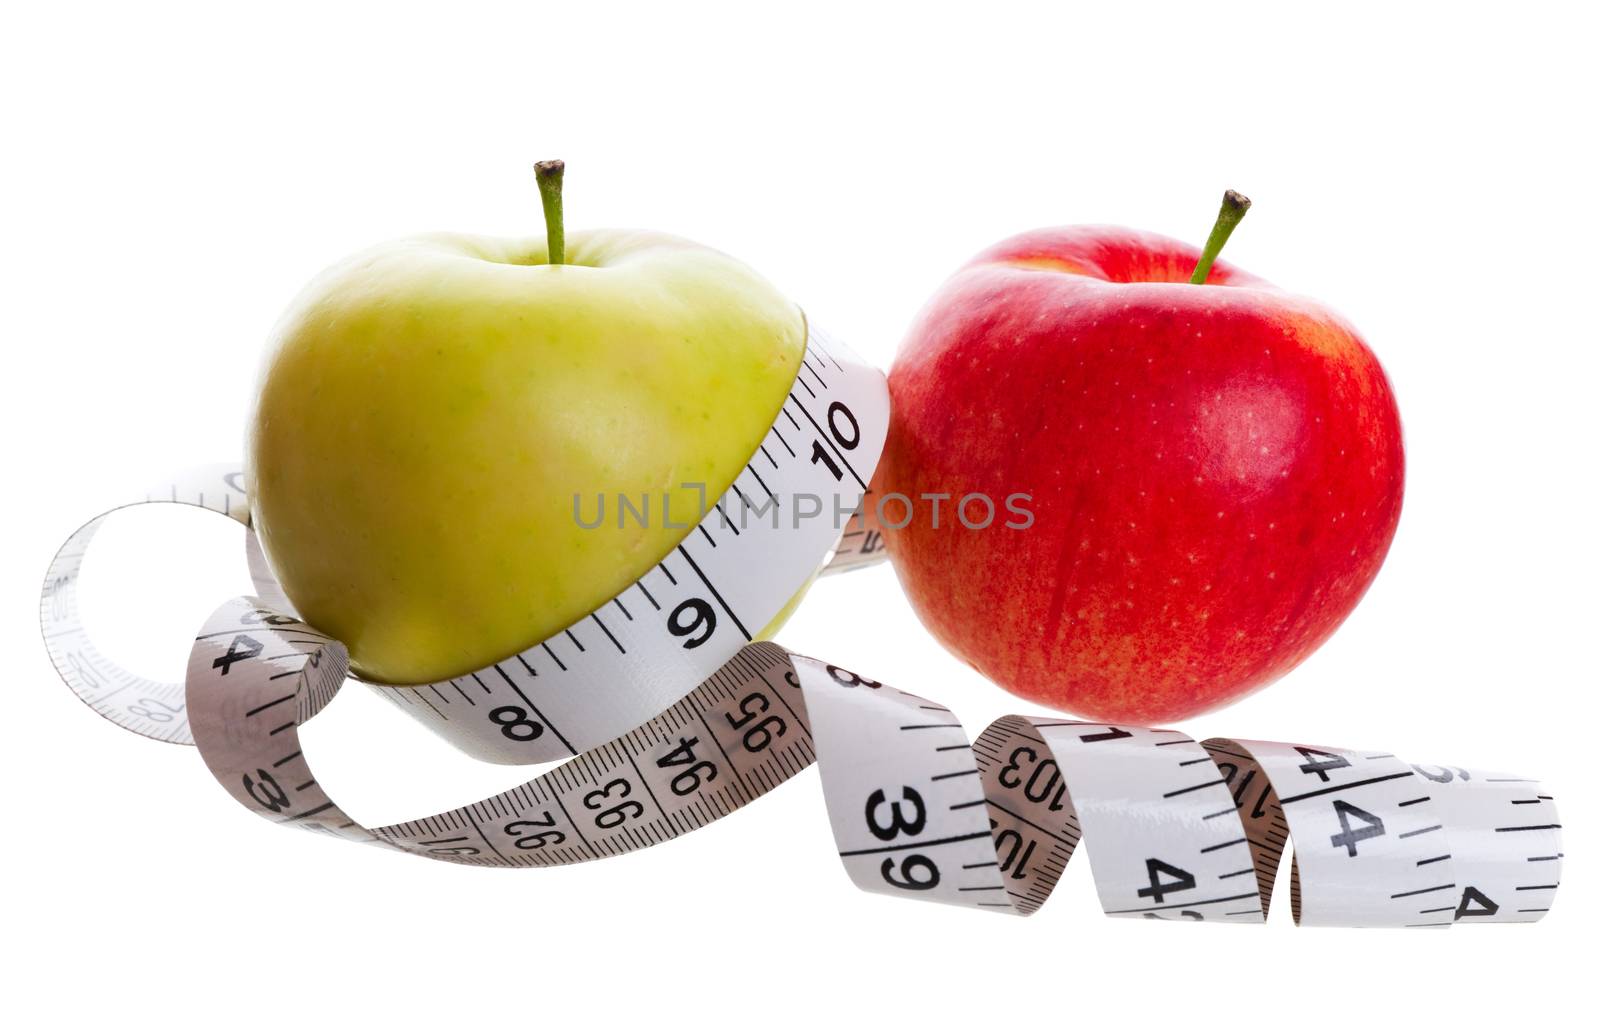 Healthy eating and weight lose conceptual image.  Shot on white background.